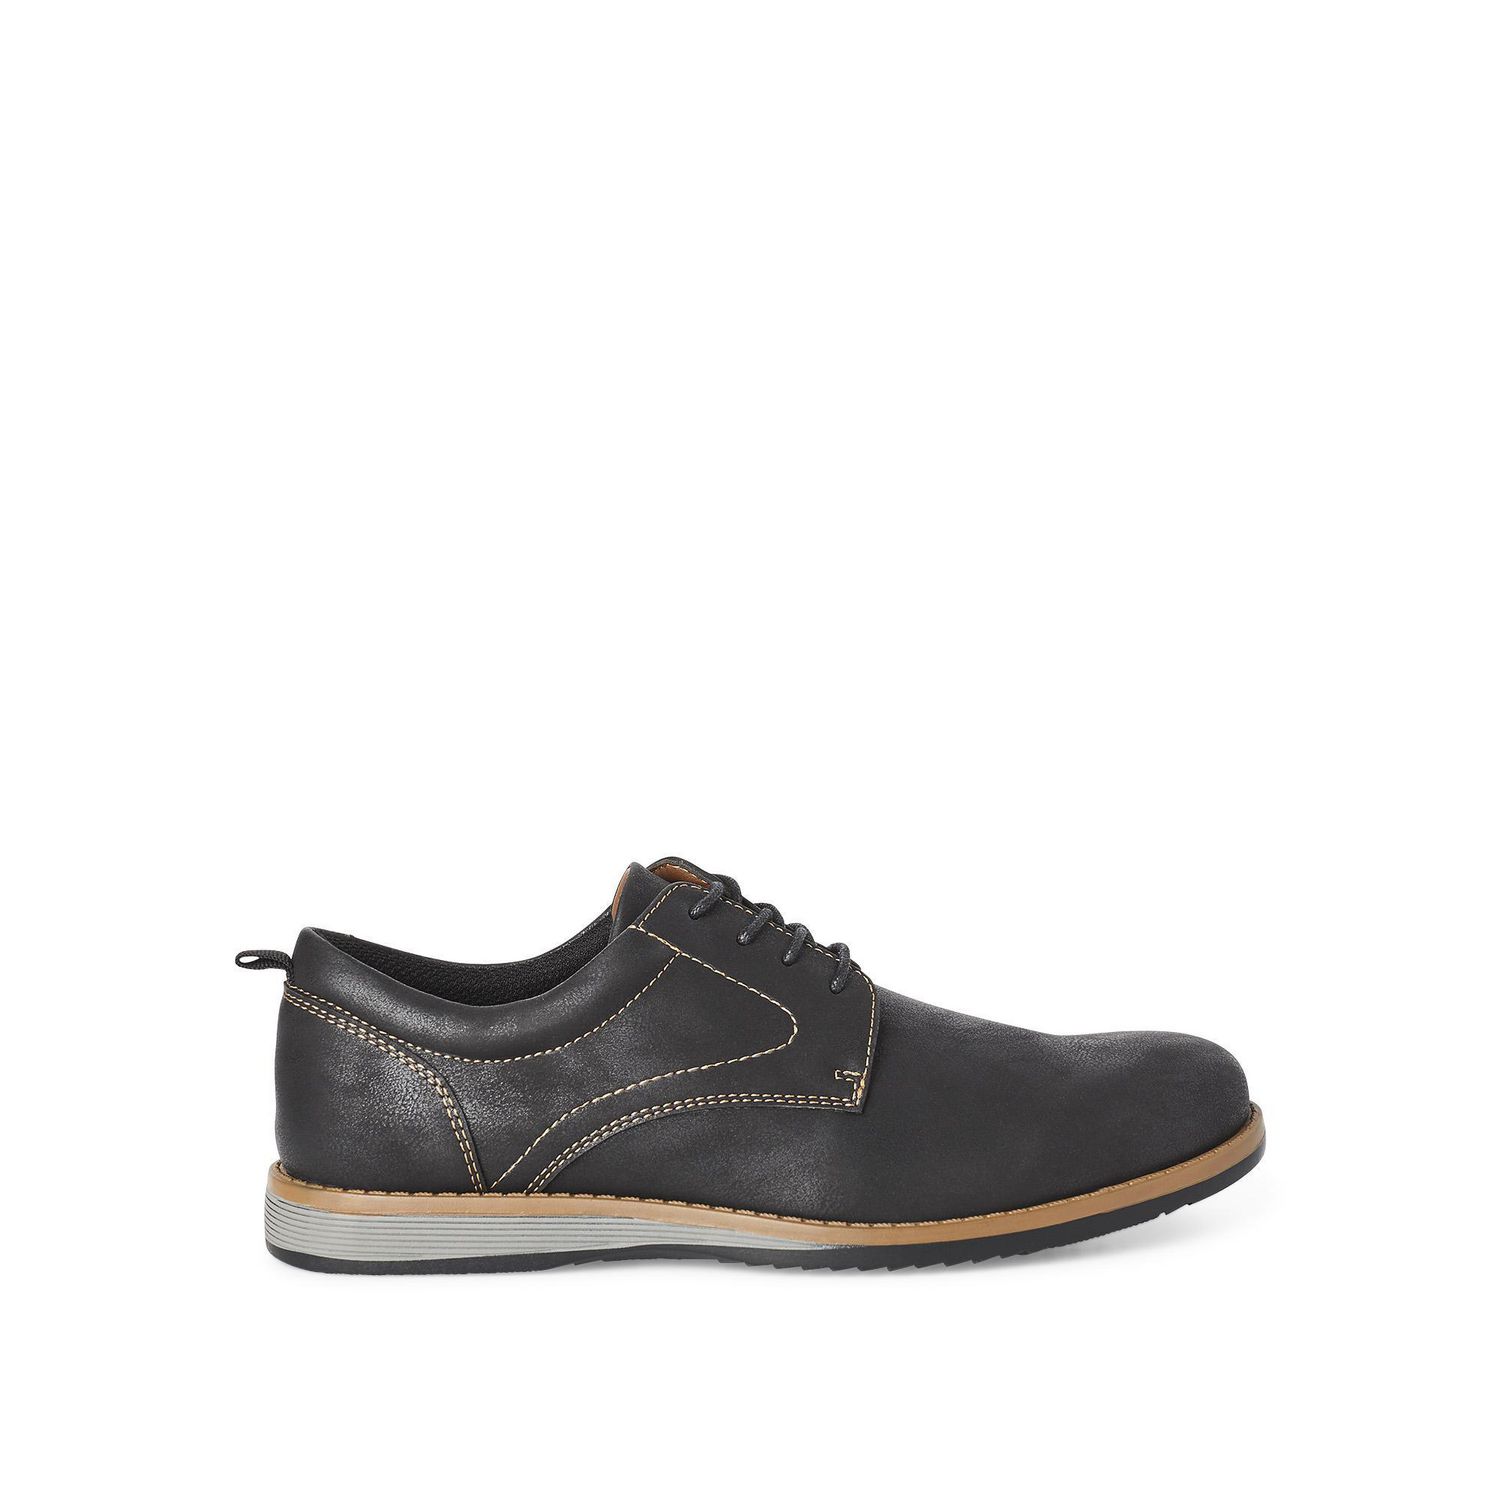 George Men's Chad Wedge Sole Casual Shoes | Walmart Canada